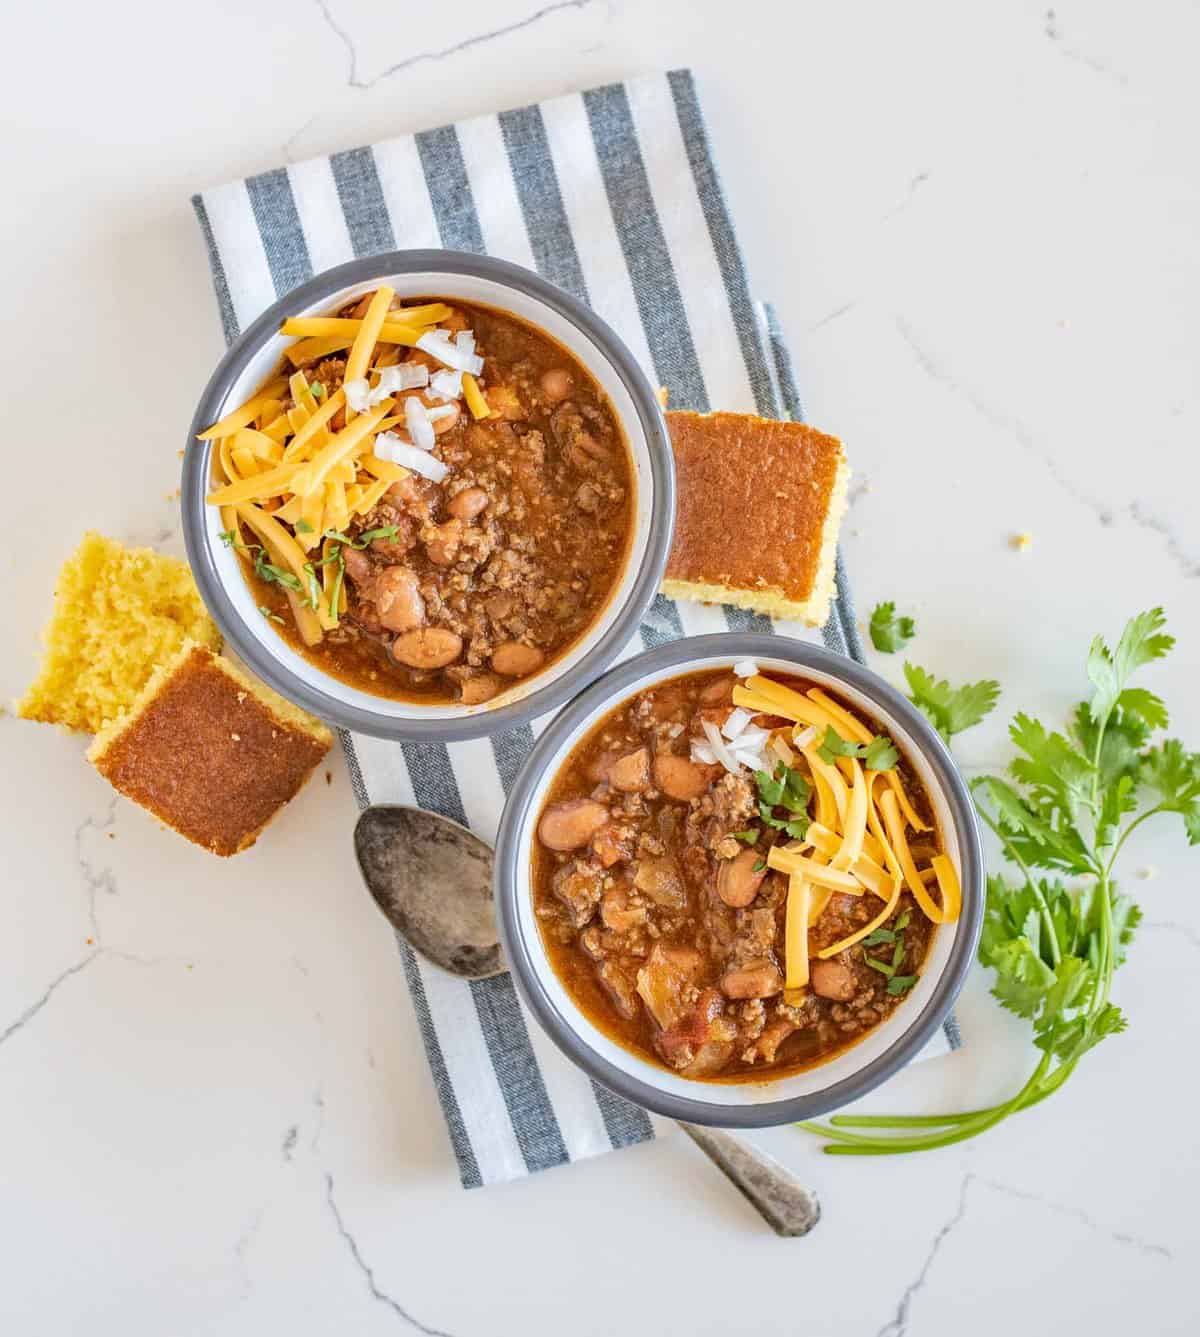 Quick and easy slow cooker chili made with all the classics like beans, tomatoes, and ground beef but contains two other surprising ingredients that will add tons of flavor with no extra work.